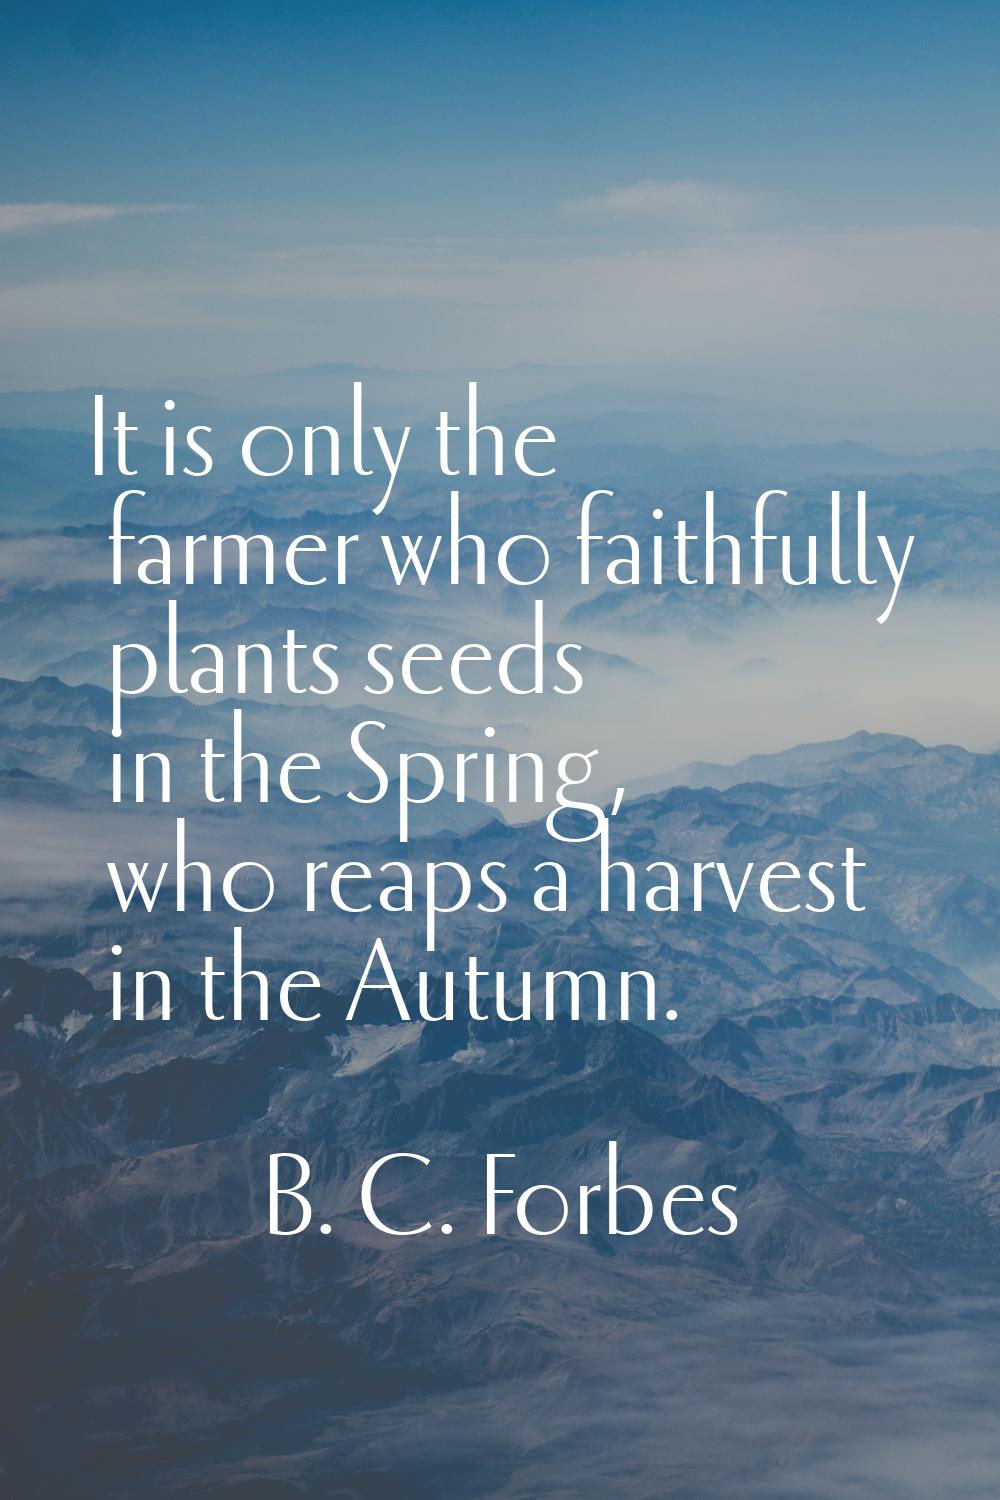 It is only the farmer who faithfully plants seeds in the Spring, who reaps a harvest in the Autumn.